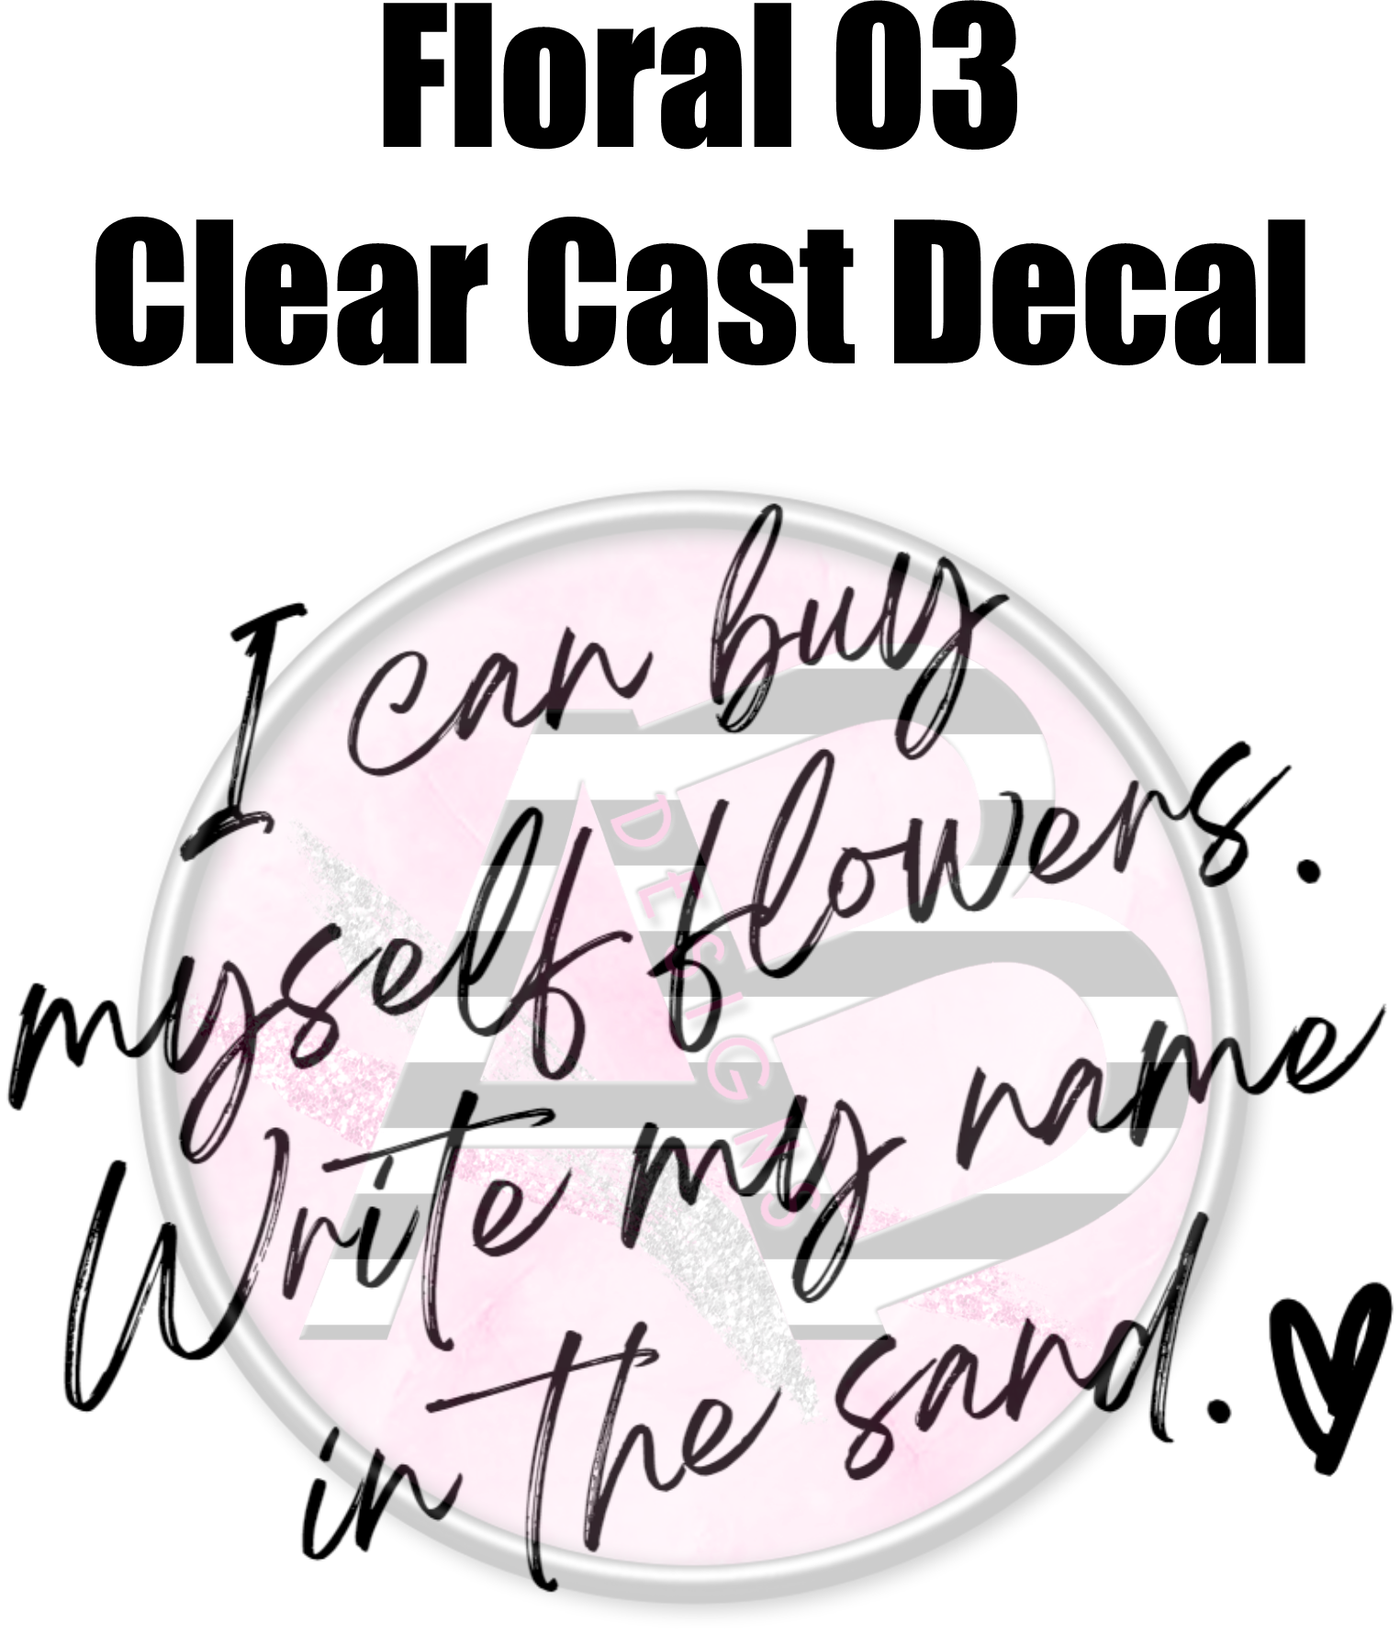 Floral 03 - Clear Cast Decal